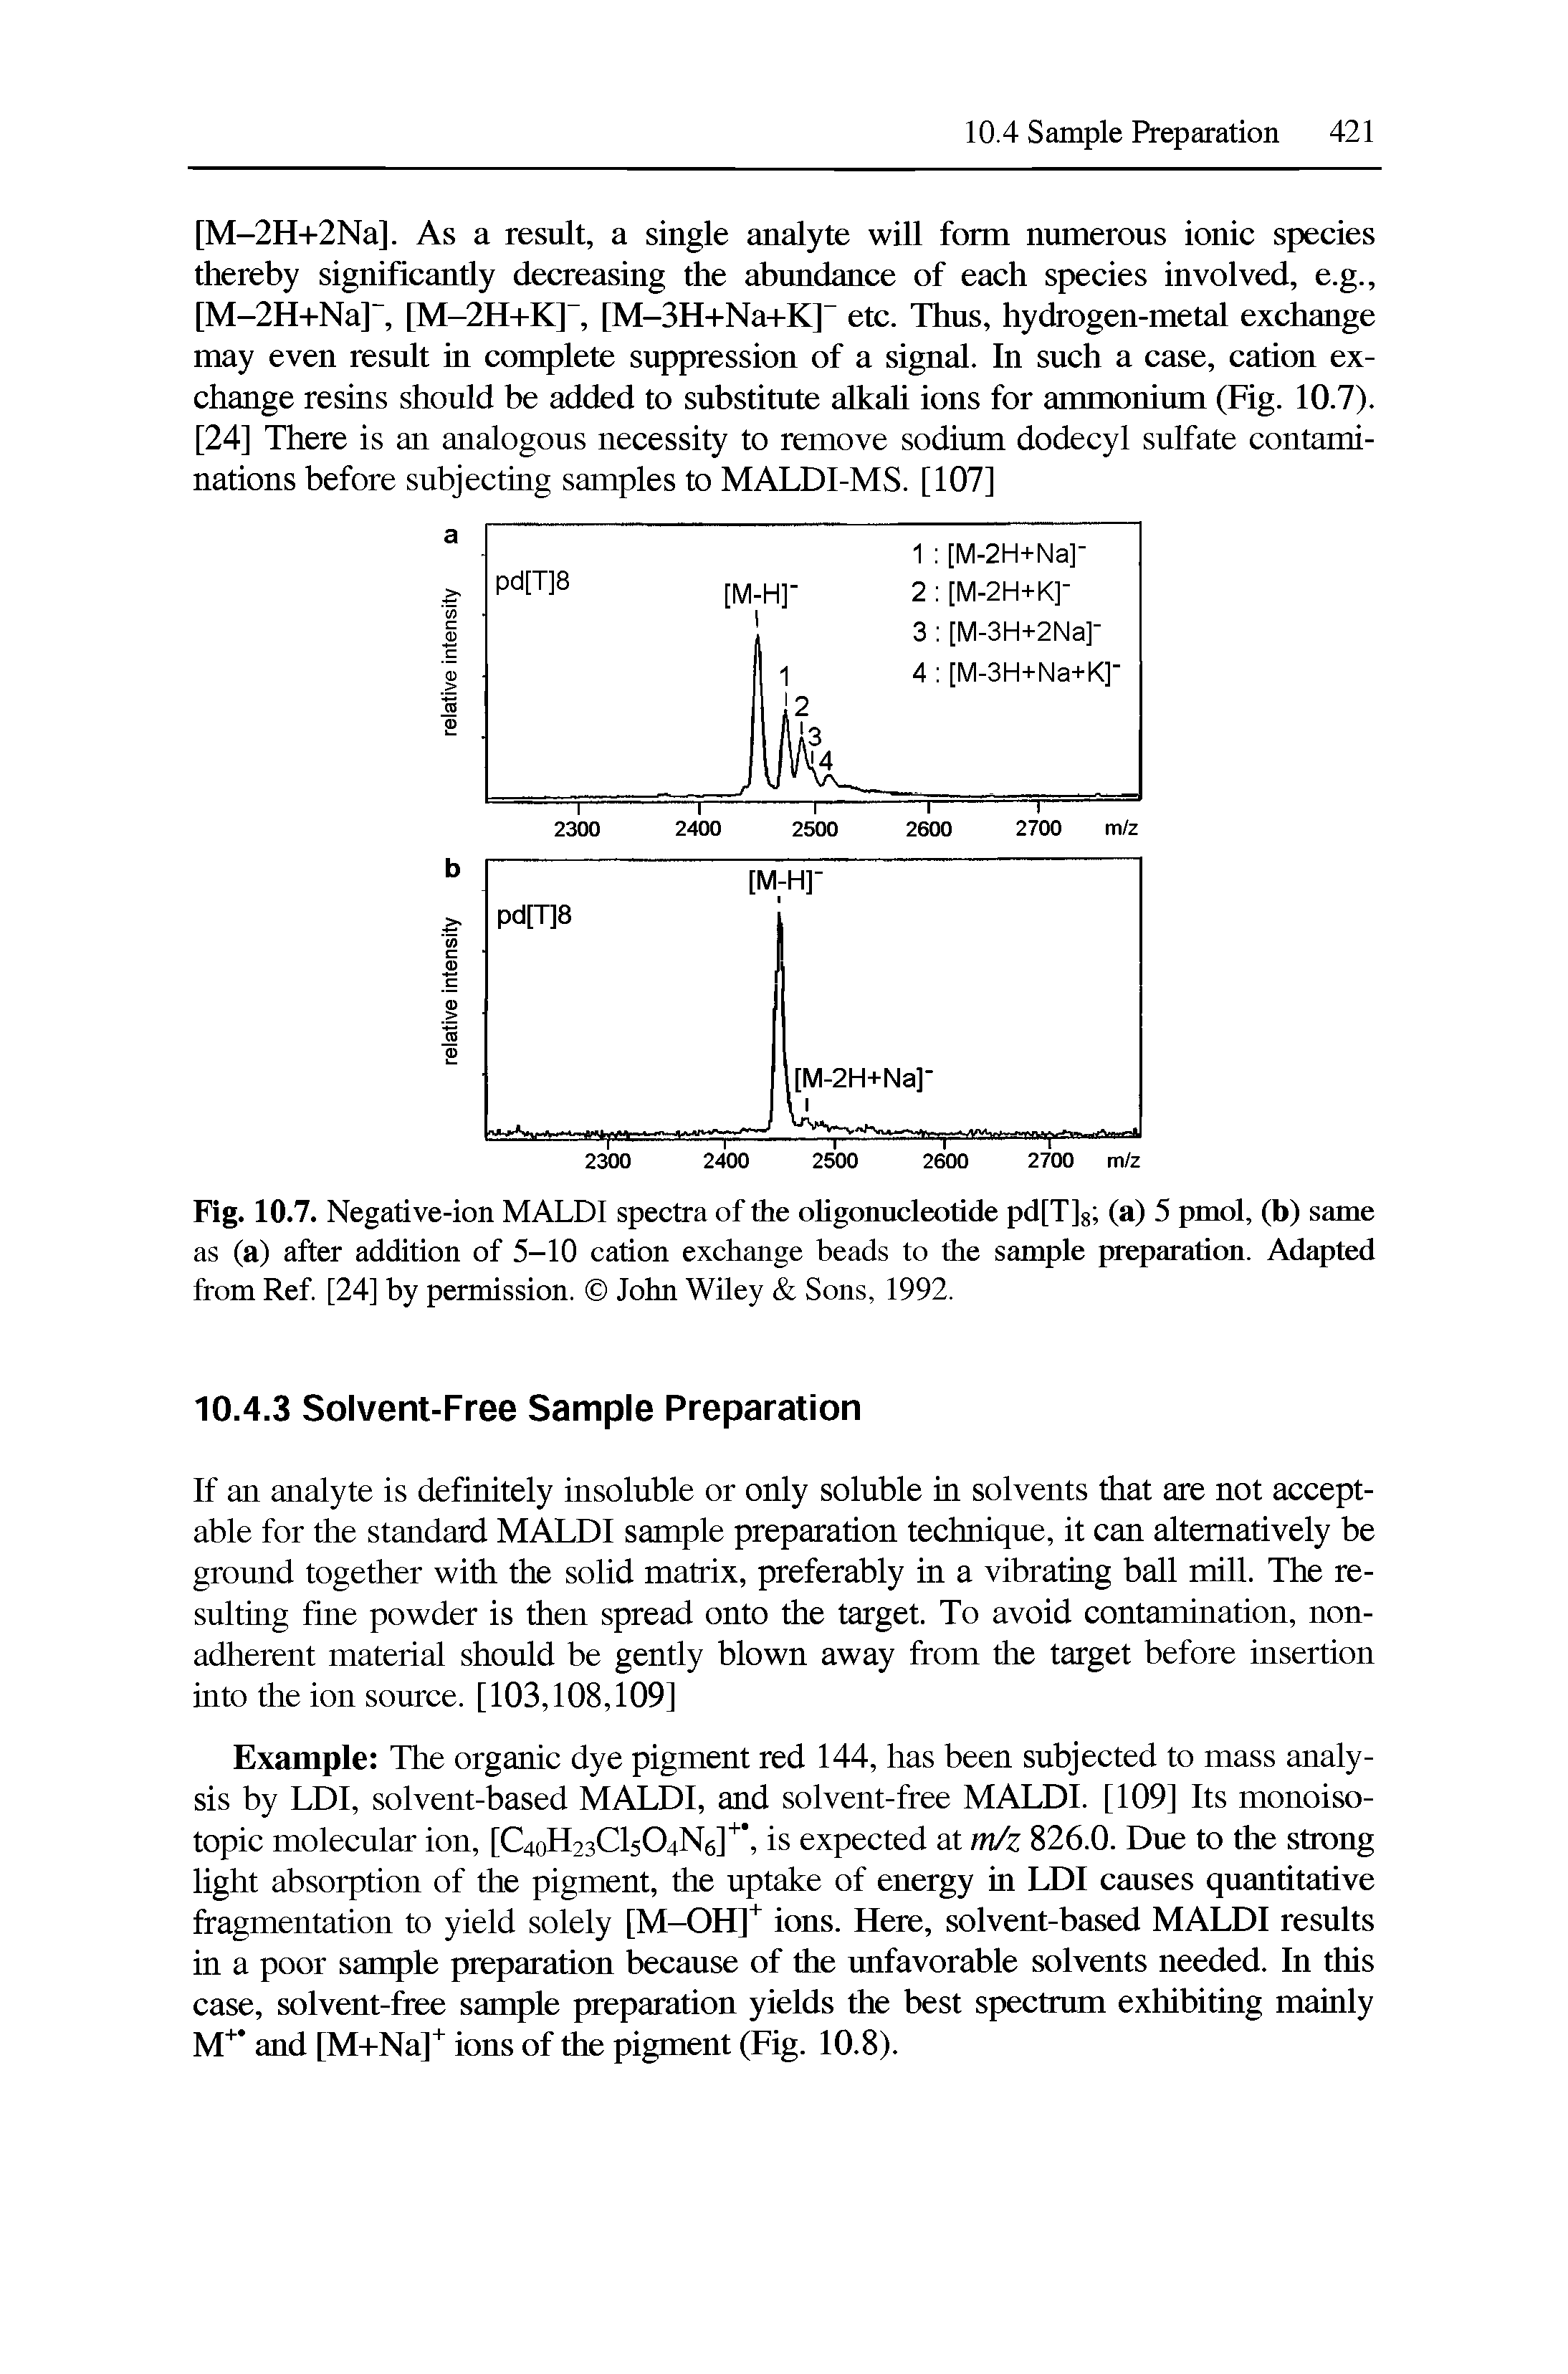 Fig. 10.7. Negative-ion MALDI spectra of the oligonucleotide pd[T]g (a) 5 pmol, (b) same as (a) after addition of 5-10 cation exchange beads to the sample preparation. Adapted from Ref [24] by permission. John Wiley Sons, 1992.